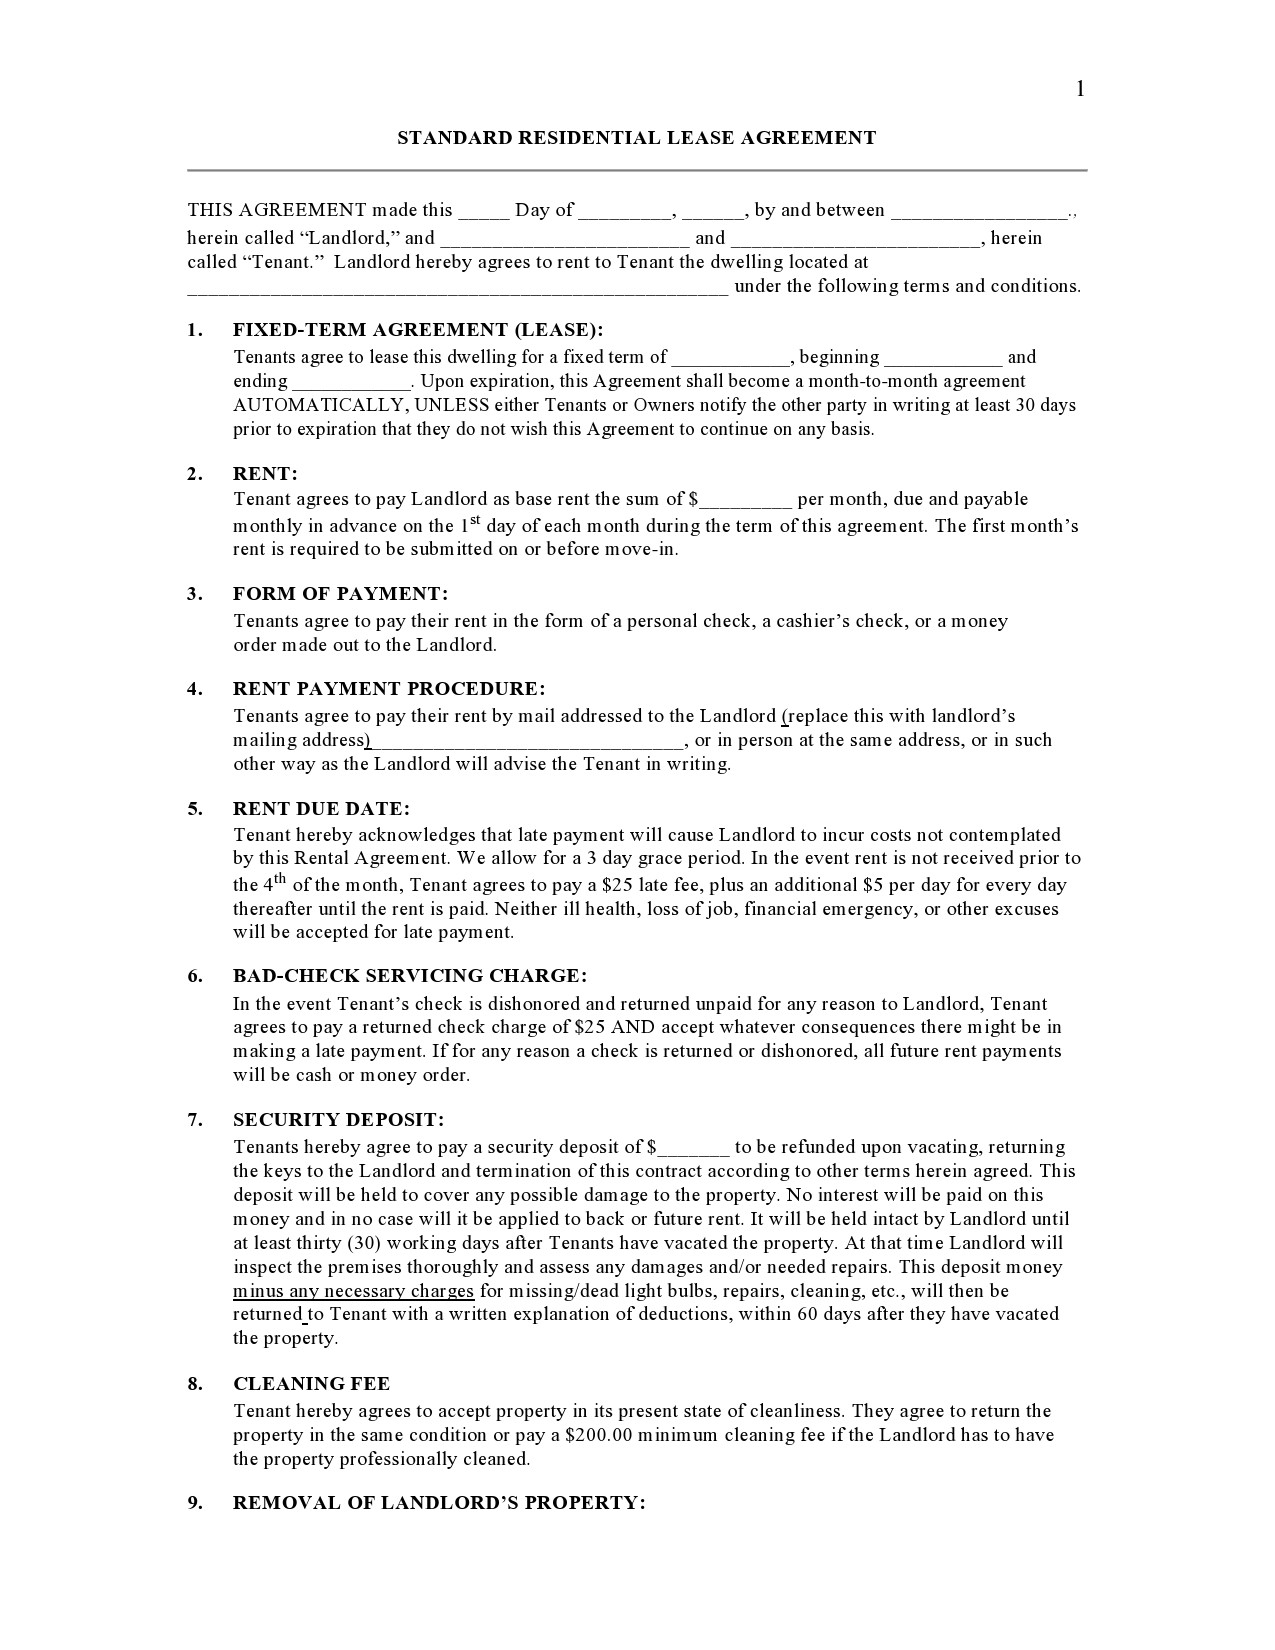 Free residential lease agreement 05